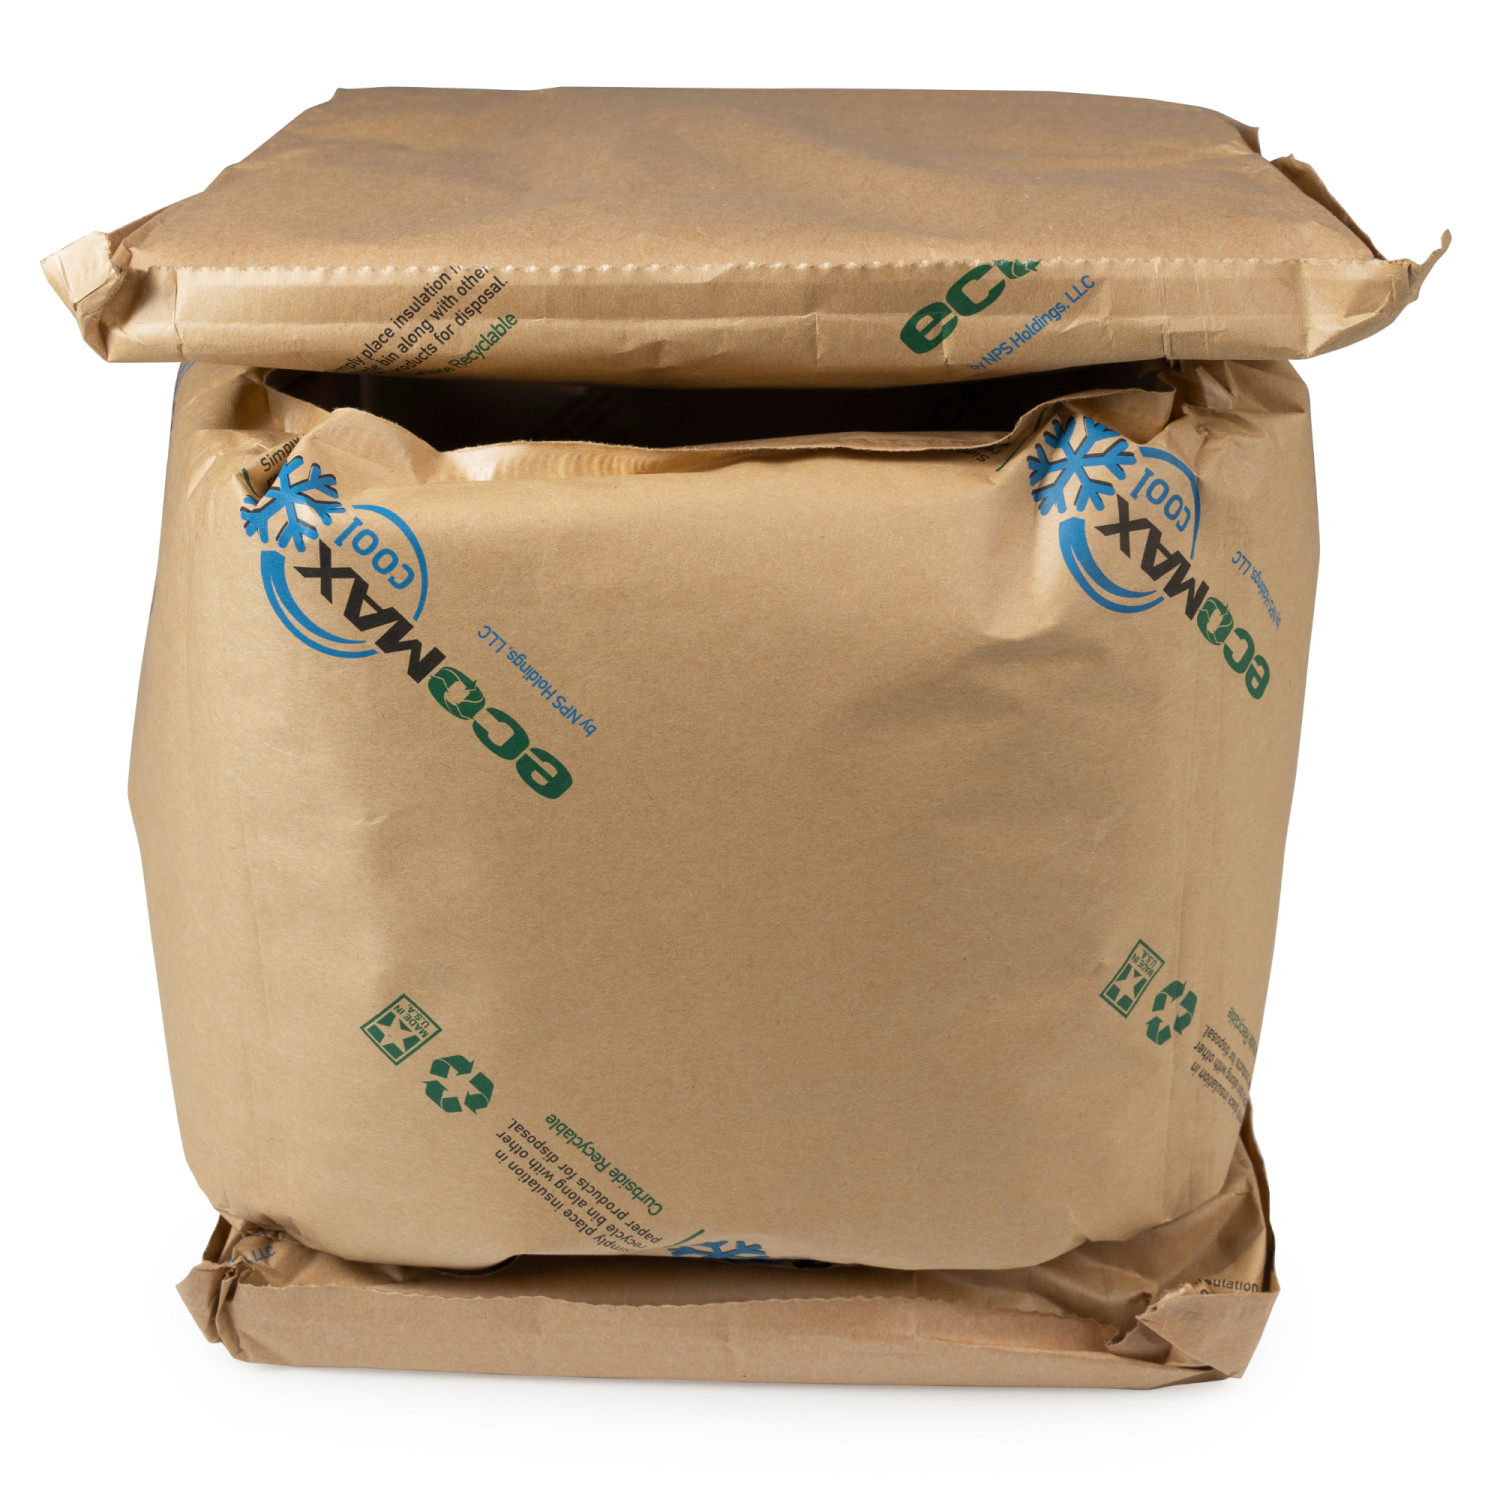 14 x 14 x 14 Insulation Liners for Shipping Box, 5.8 Gallons Capacity,  EcoMax™ Thermal-Paper Liners buy in stock in U.S. in IDL Packaging